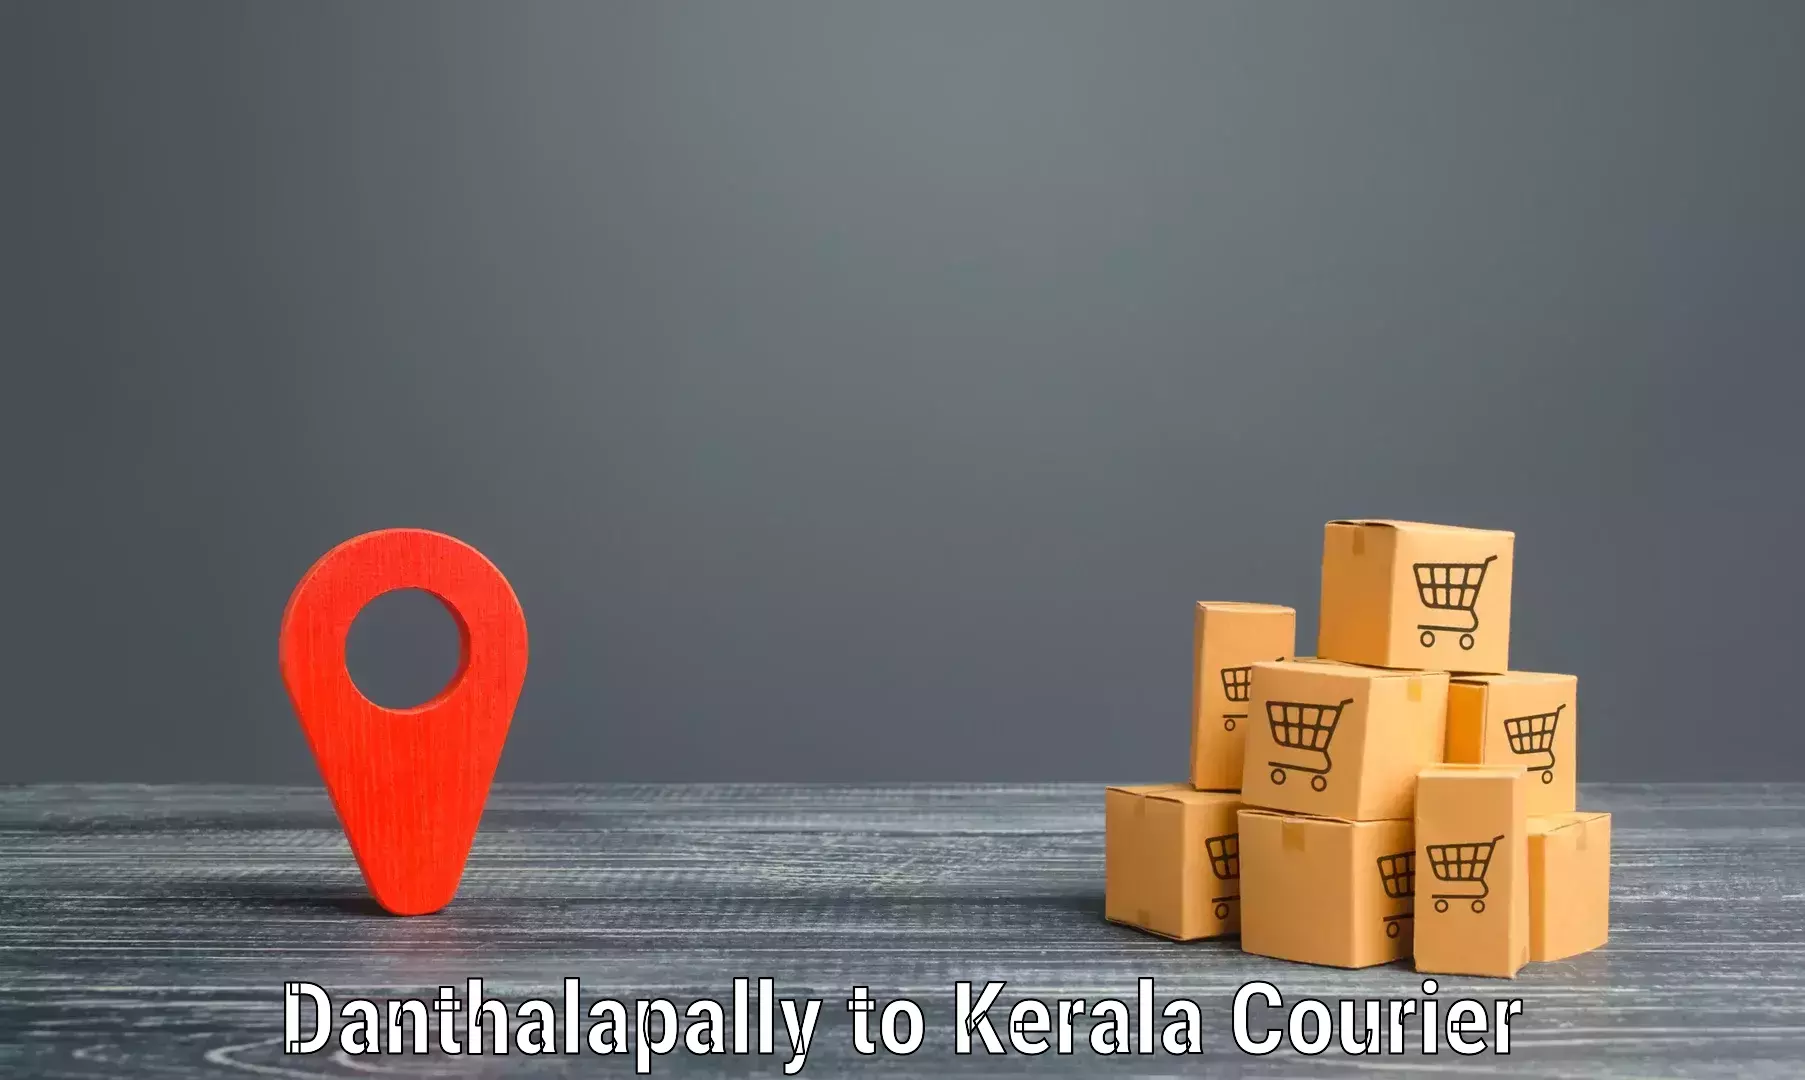 Optimized delivery routes in Danthalapally to Kazhakkoottam